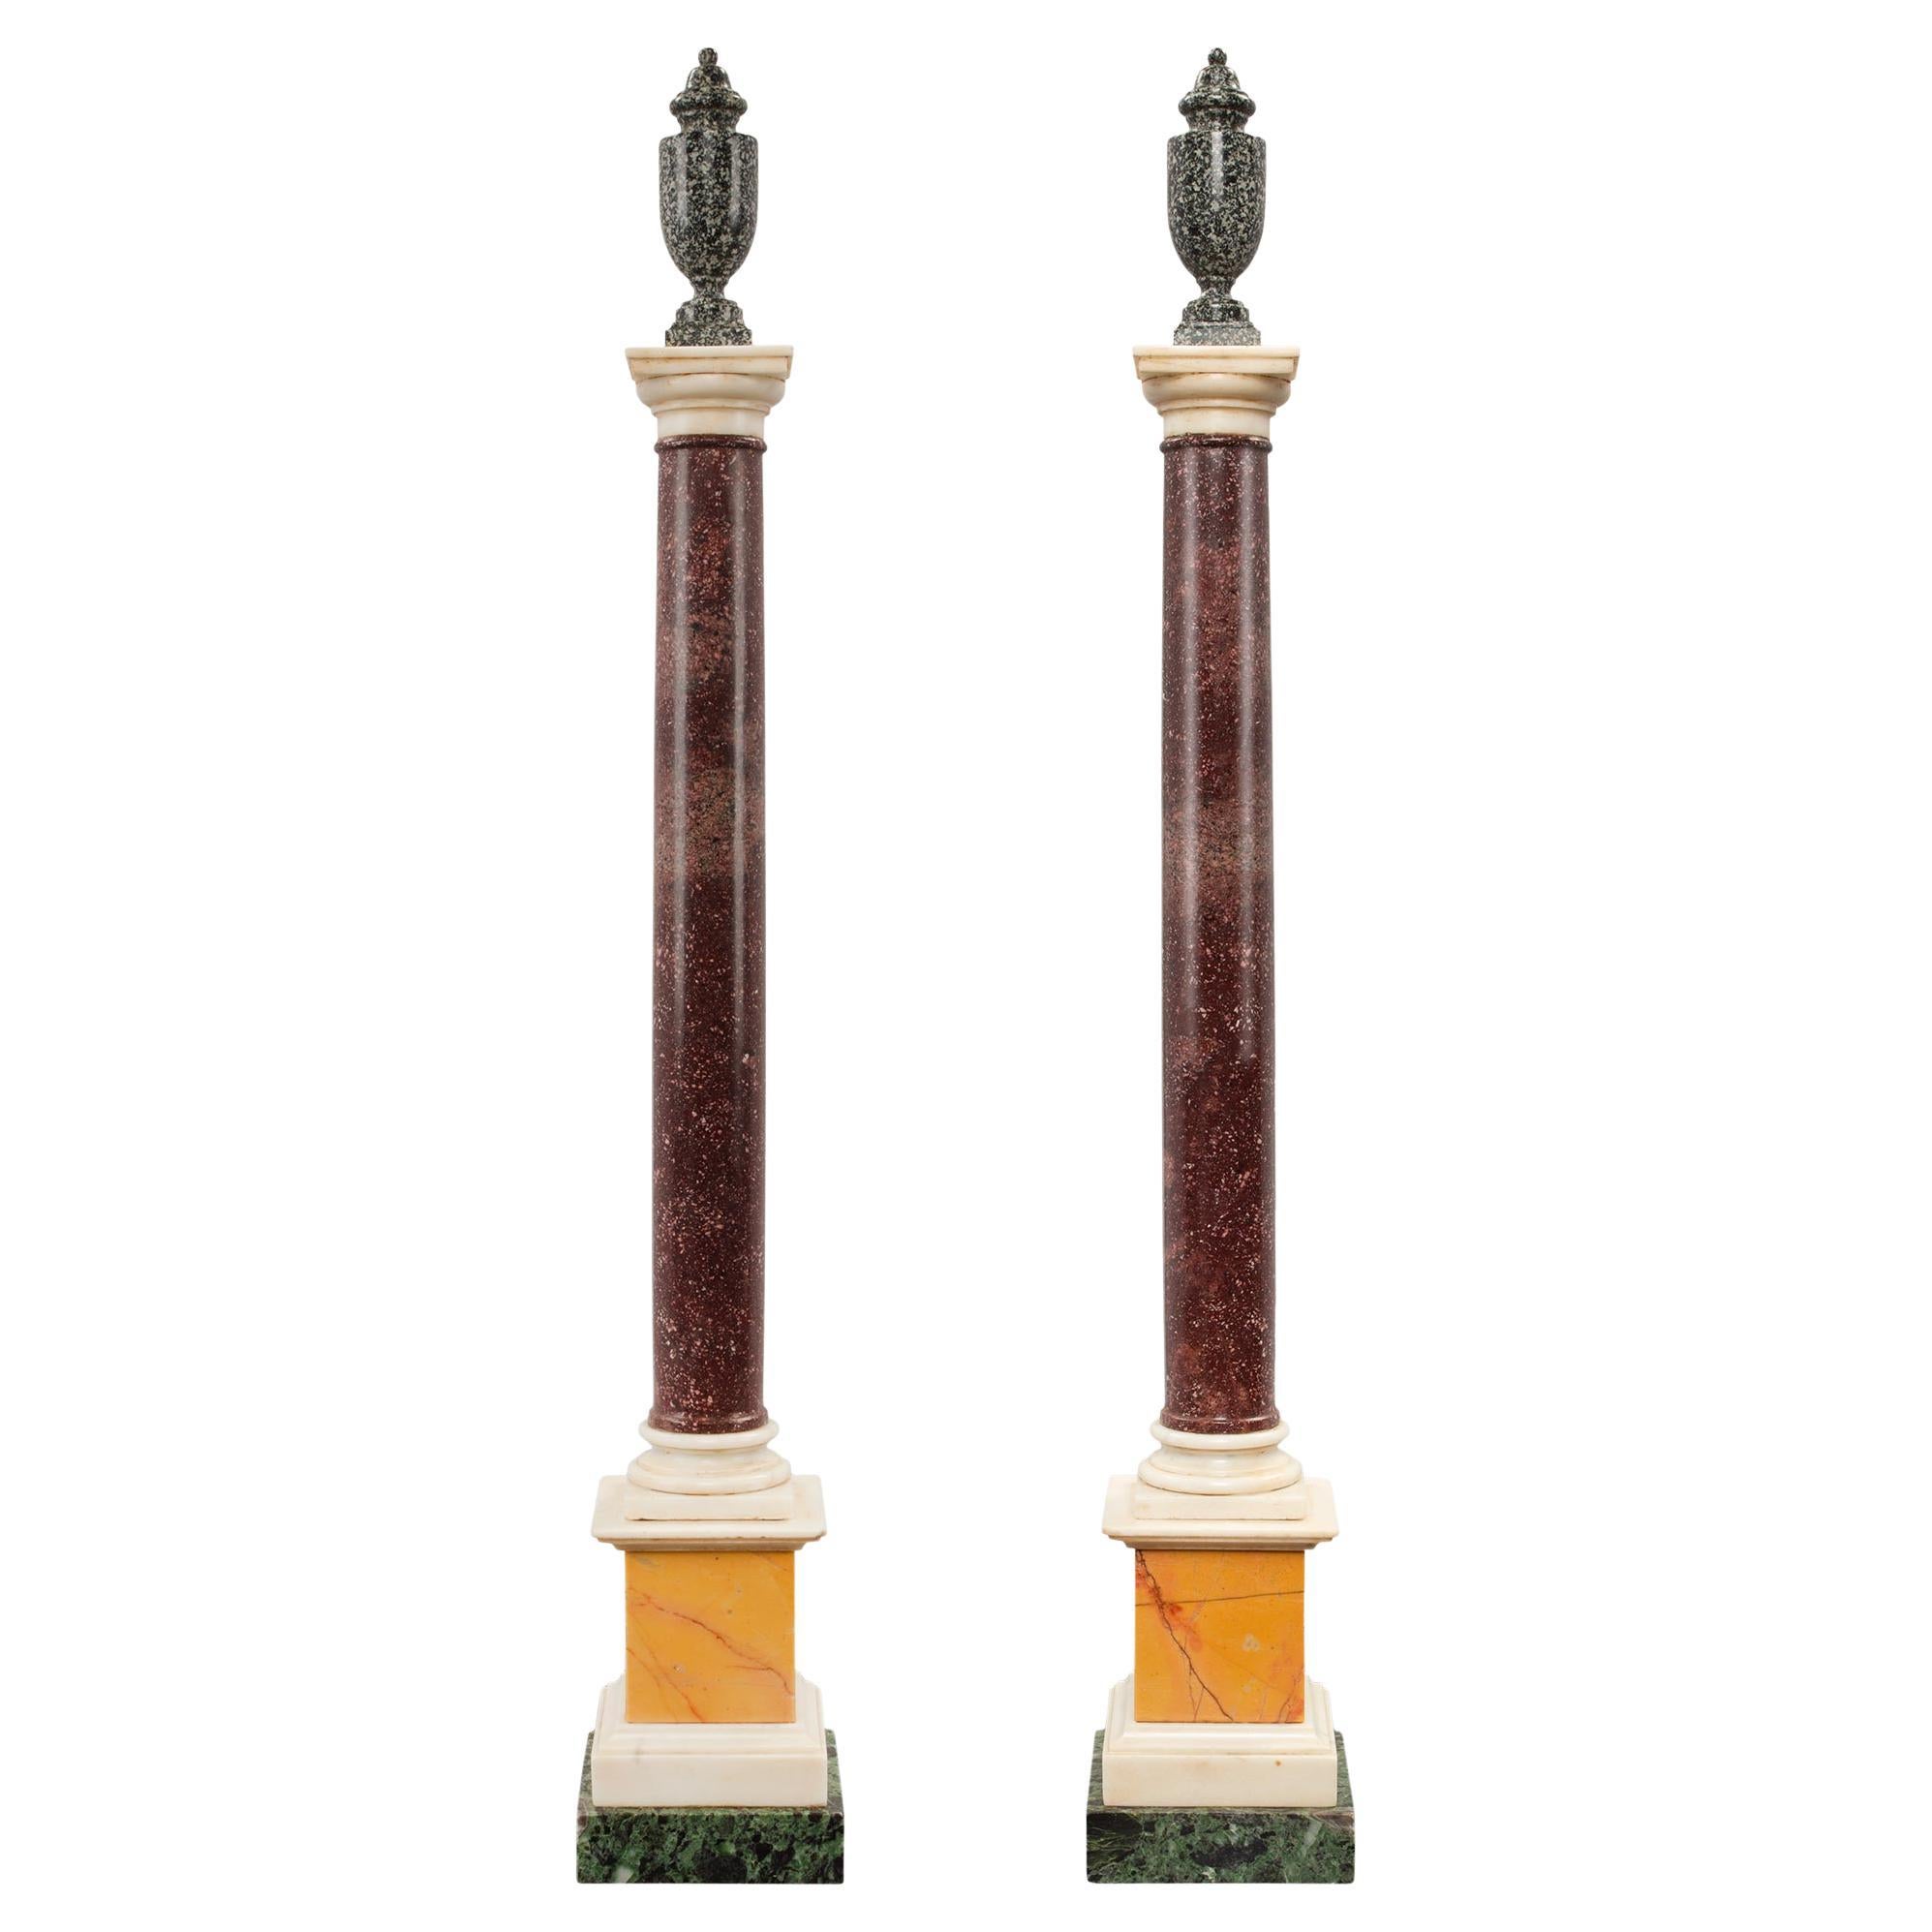 Pair of Italian 19th Century Neoclassical Style Marble and Porphyry Columns